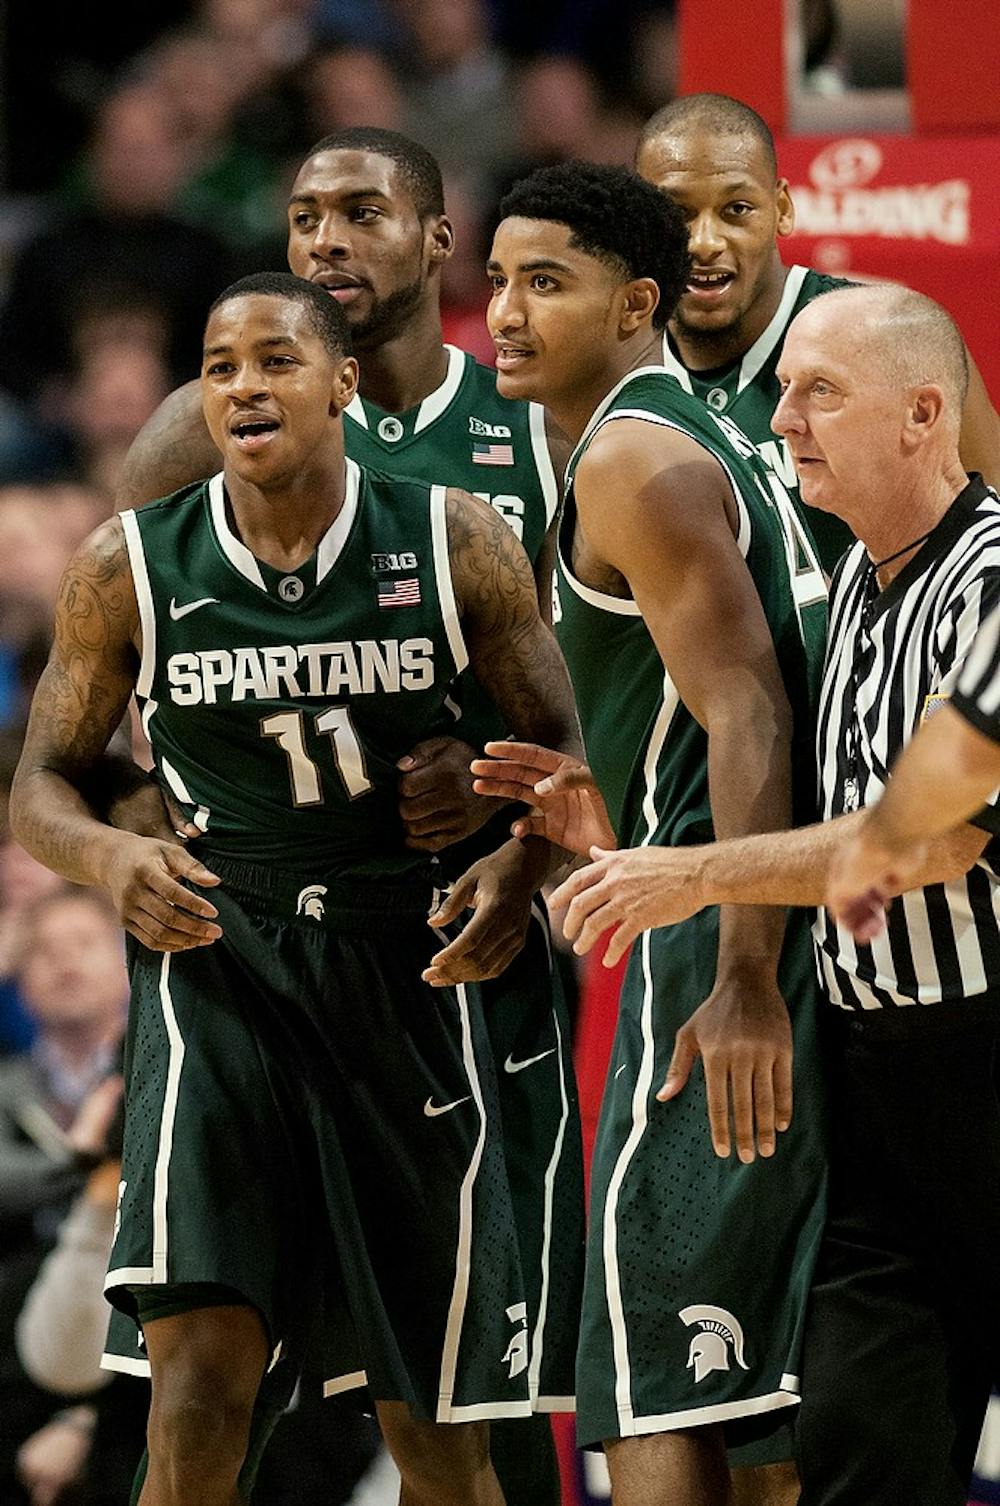 	<p>Senior guard Keith Appling gets picked up by his teammates after a fall during the game against Kentucky on Nov. 12, 2013, during the Champions Classic at The United Center in Chicago, IL. The Spartans defeated the Wildcats, 78-74. Khoa Nguyen/The State News</p>